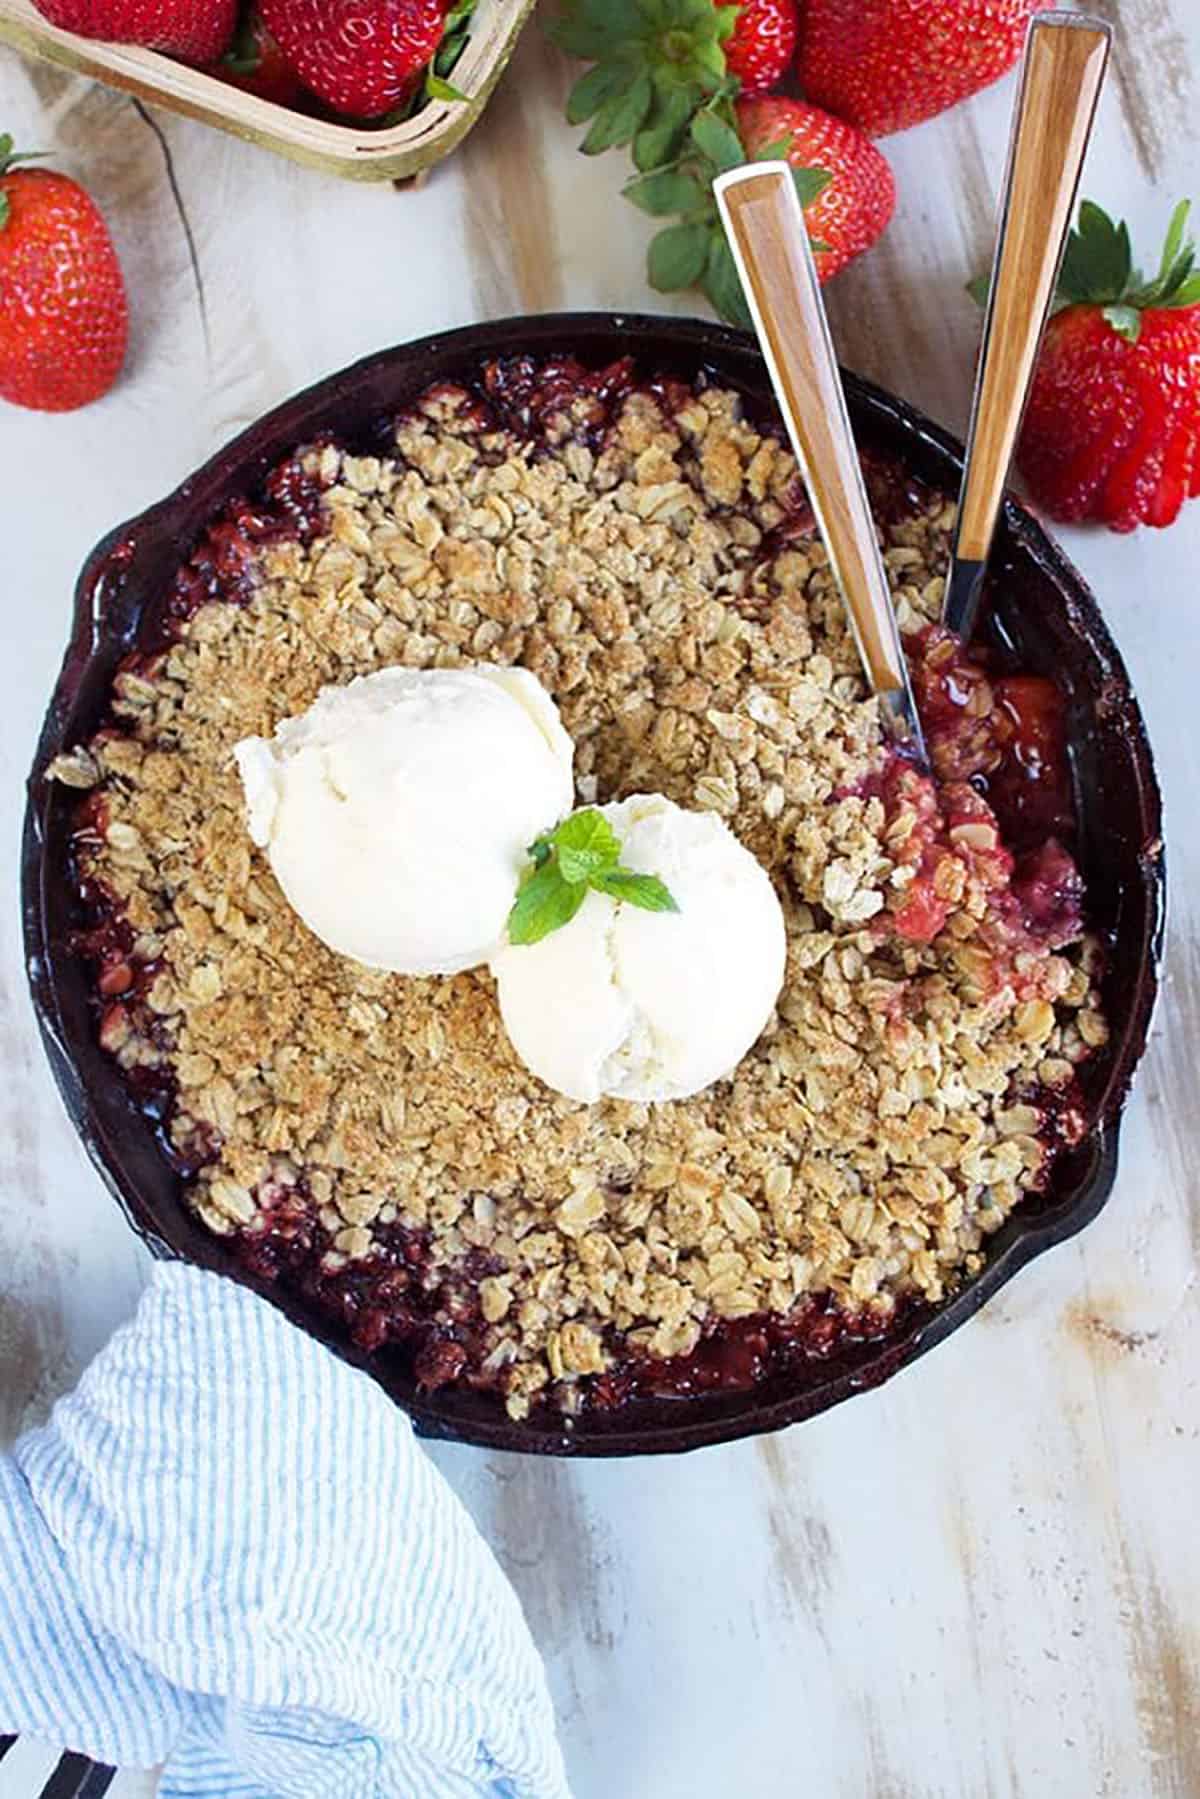 Cast iron skillet with strawberry rhubarb crisp and two scoops of vanilla ice cream and a blue and white striped towel tied to the handle.